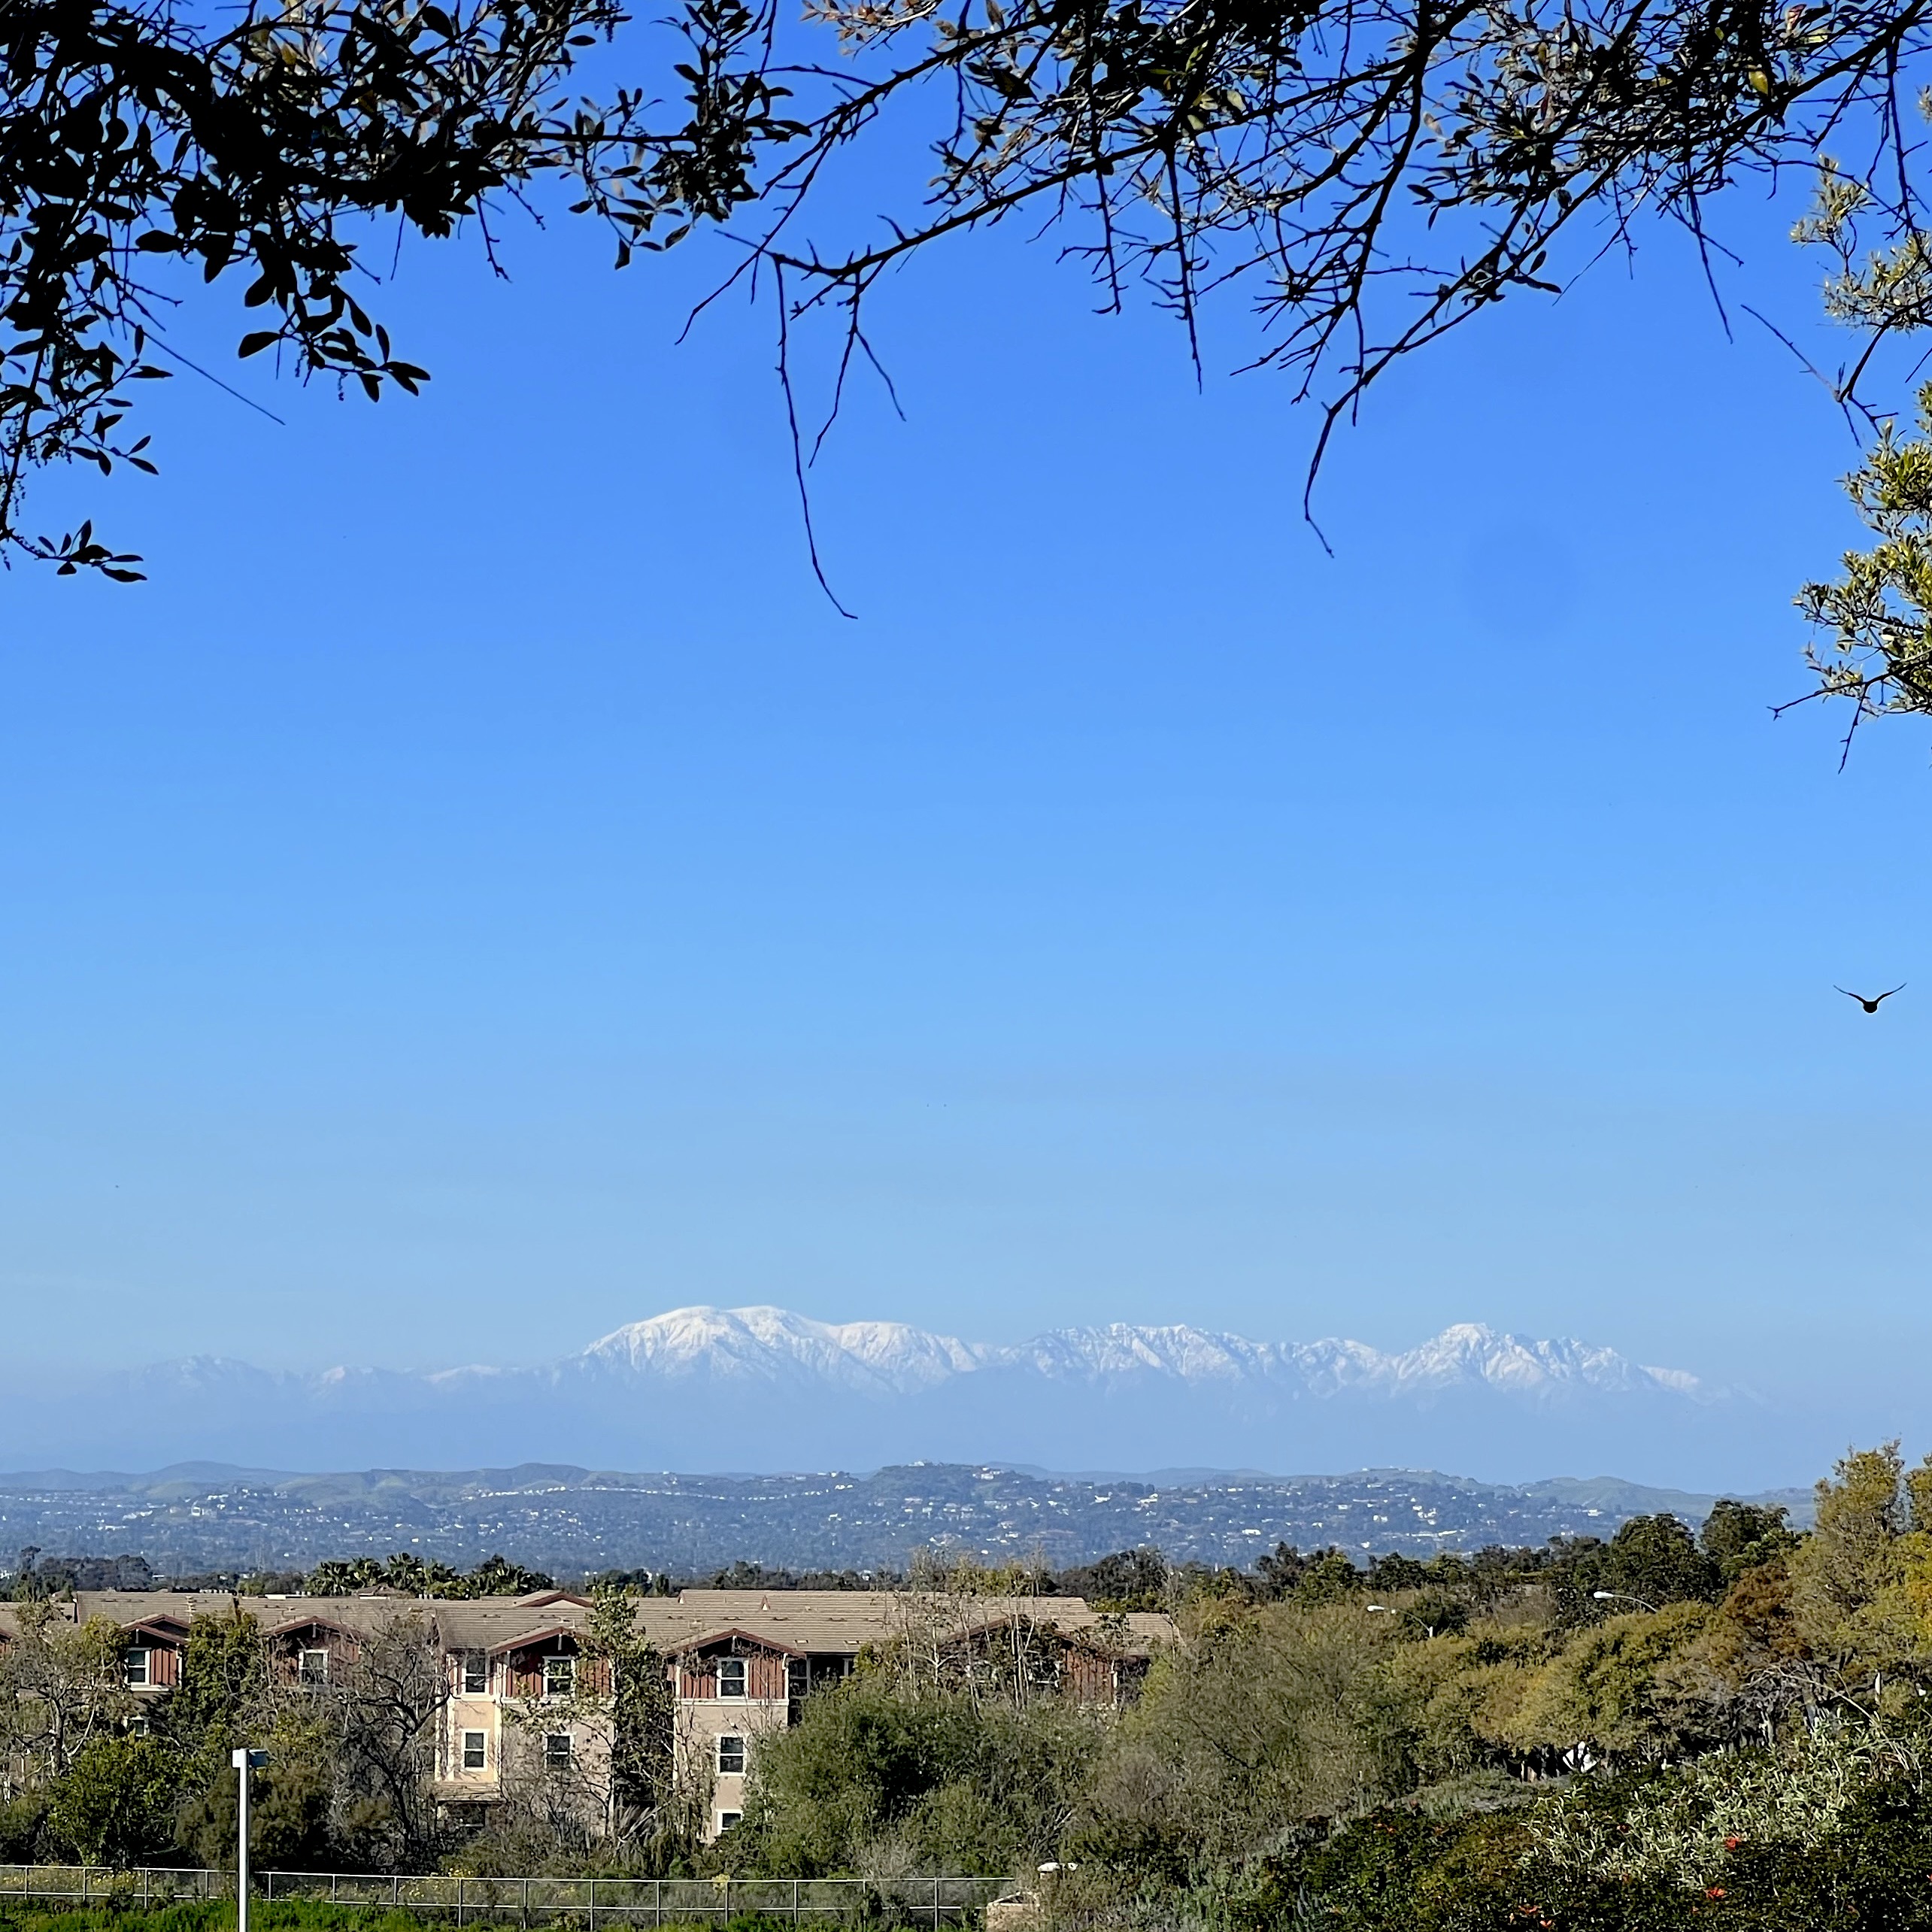 Wide shot overlooking Irvine, CA with houses in the foreground and snowcapped mountains in the background